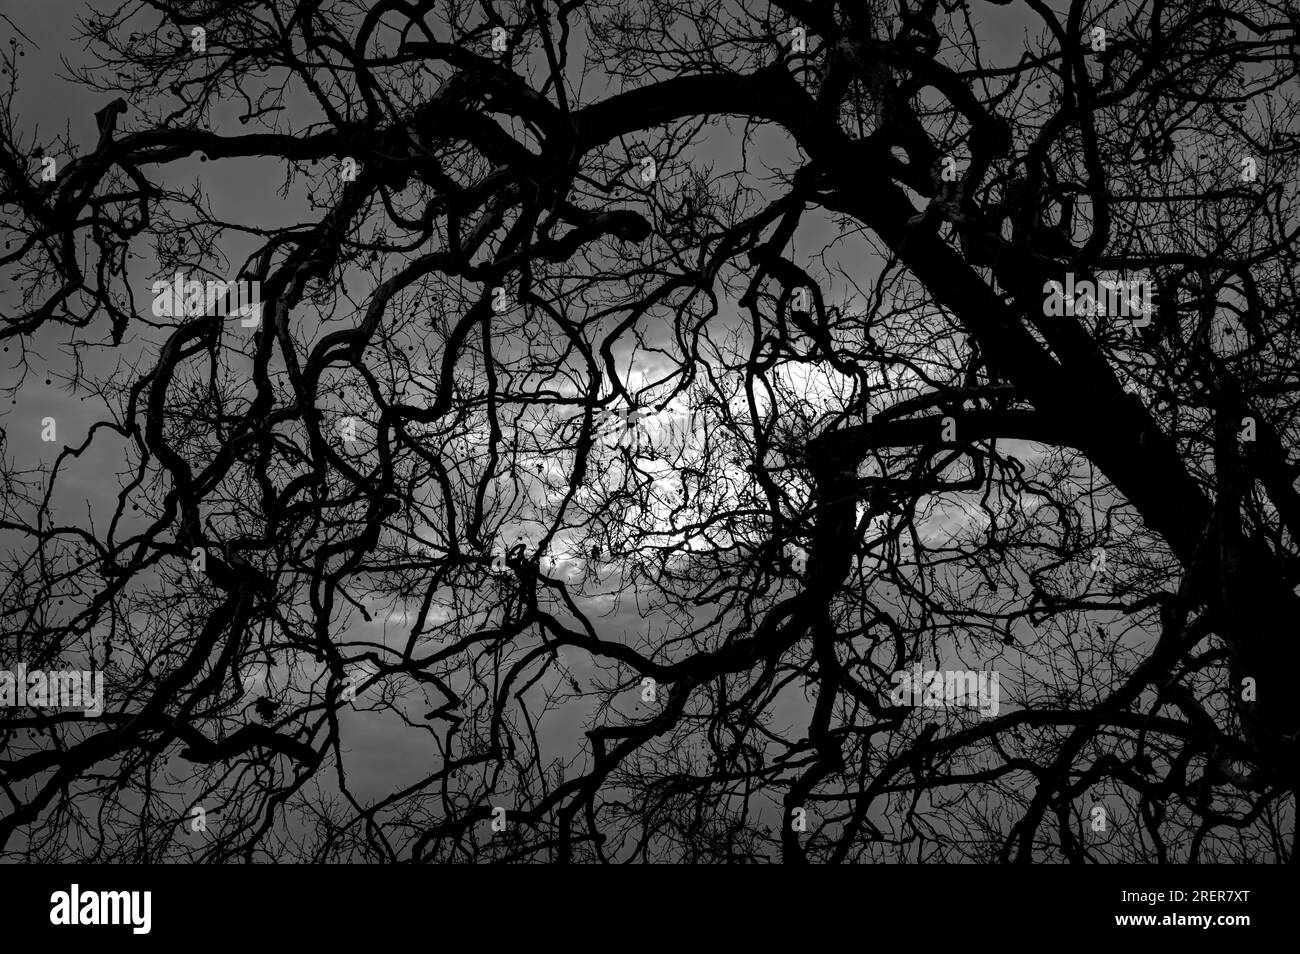 Black tree branches silhouette against a cloudy moonlit night sky. Concepts are mystery, scary, tangled, lost, confused, crooked. Stock Photo